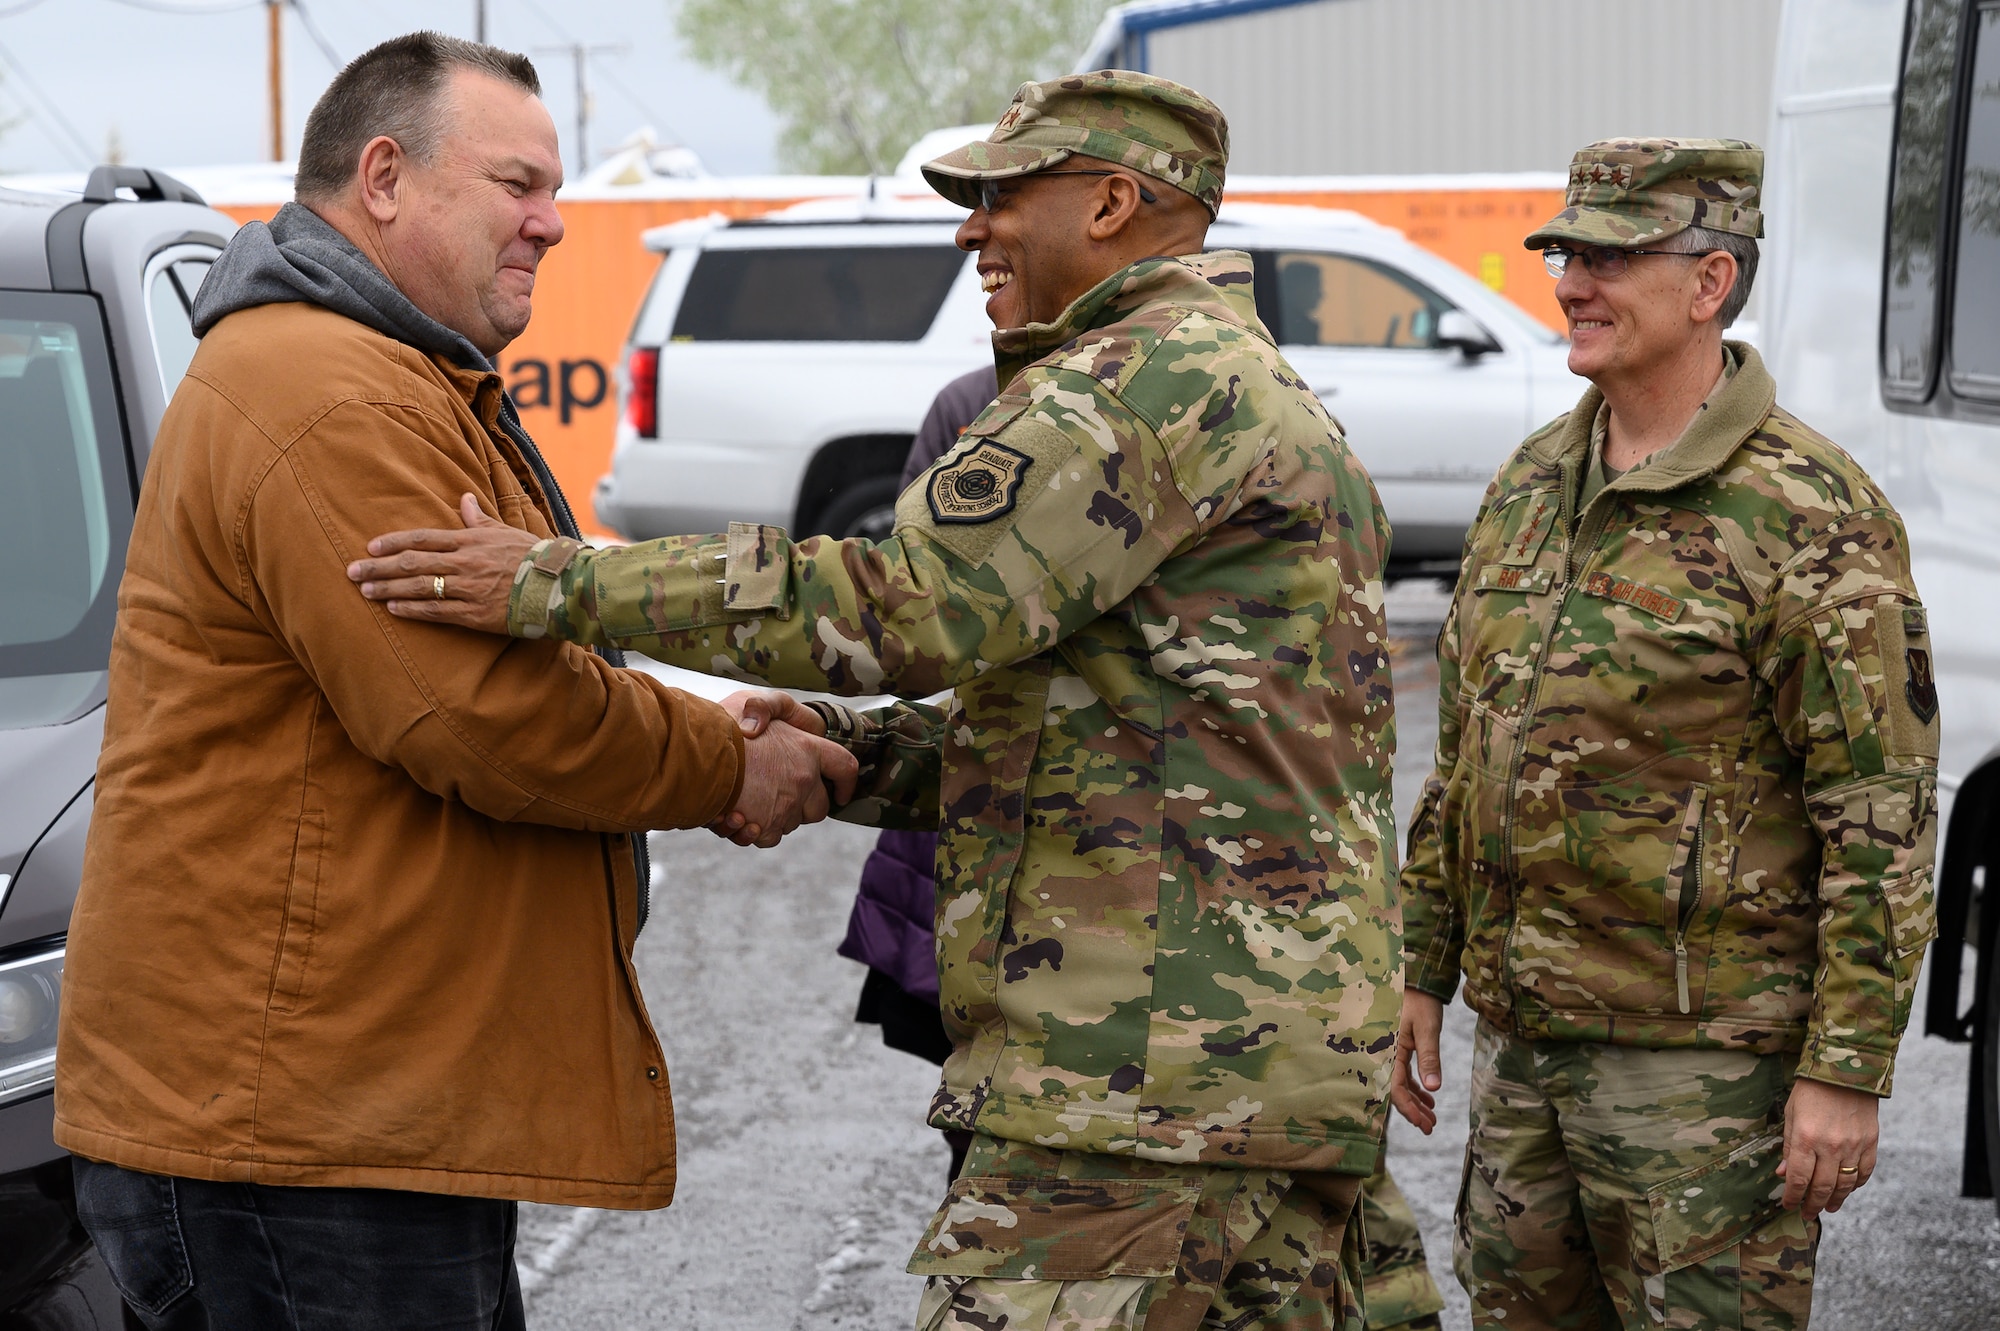 Air Force Chief of Staff Gen. CQ. Brown, Jr., center, meets U.S. Senator Jon Tester left, with Gen. Timothy M. Ray, right, Air Force Global Strike Command commander, May 21, 2021, at Malmstrom Air Force Base, Mont.